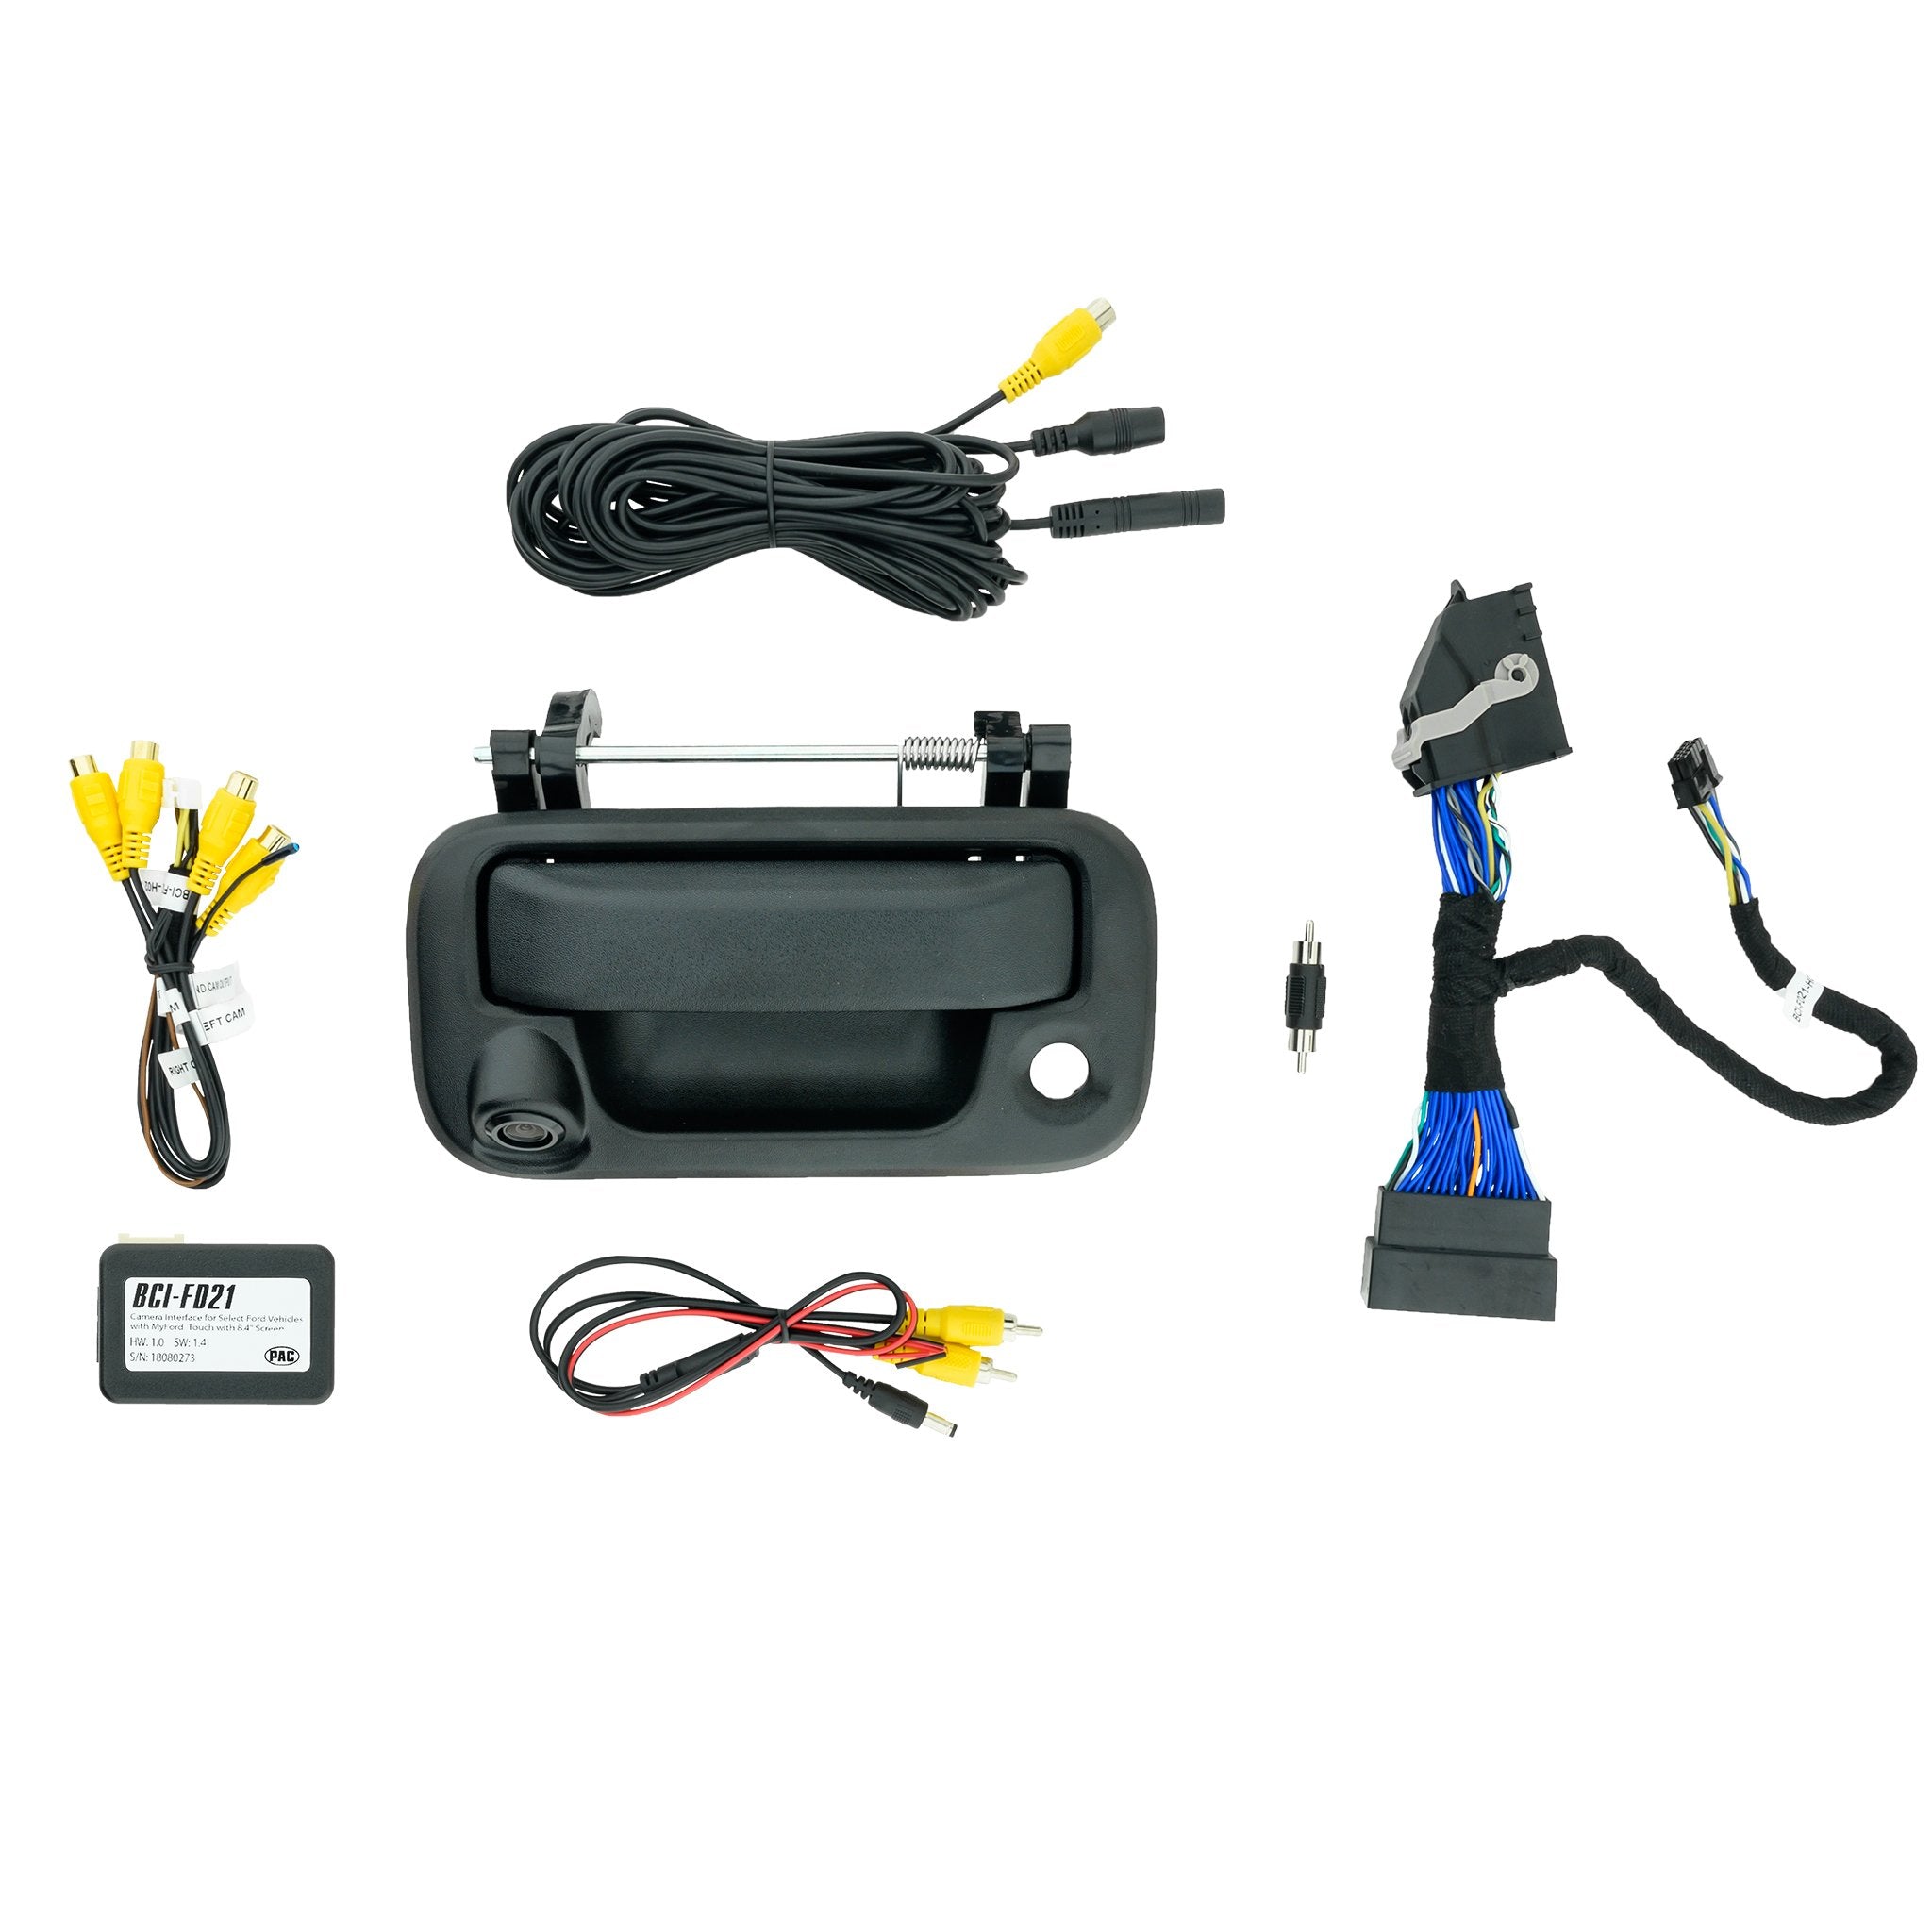 Ford Super Duty Trucks Tailgate Camera & T-harness Kit for Factory Monitor